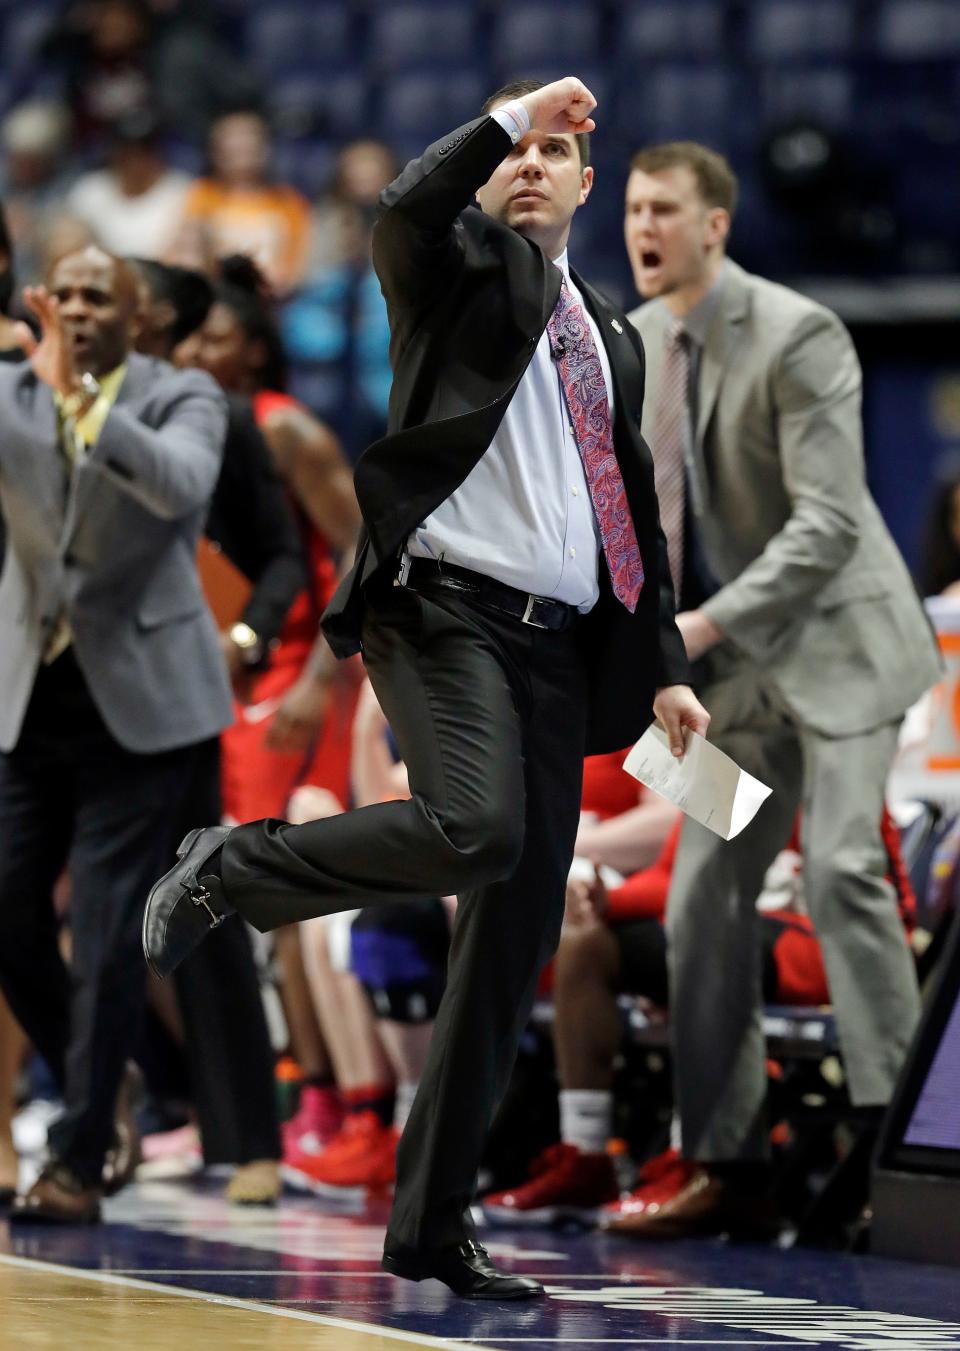 Mississippi coach Matt Insell celebrates a score against Missouri during the first half of an NCAA college basketball game at the women's Southeastern Conference tournament Thursday, March 1, 2018, in Nashville, Tenn. (AP Photo/Mark Humphrey)